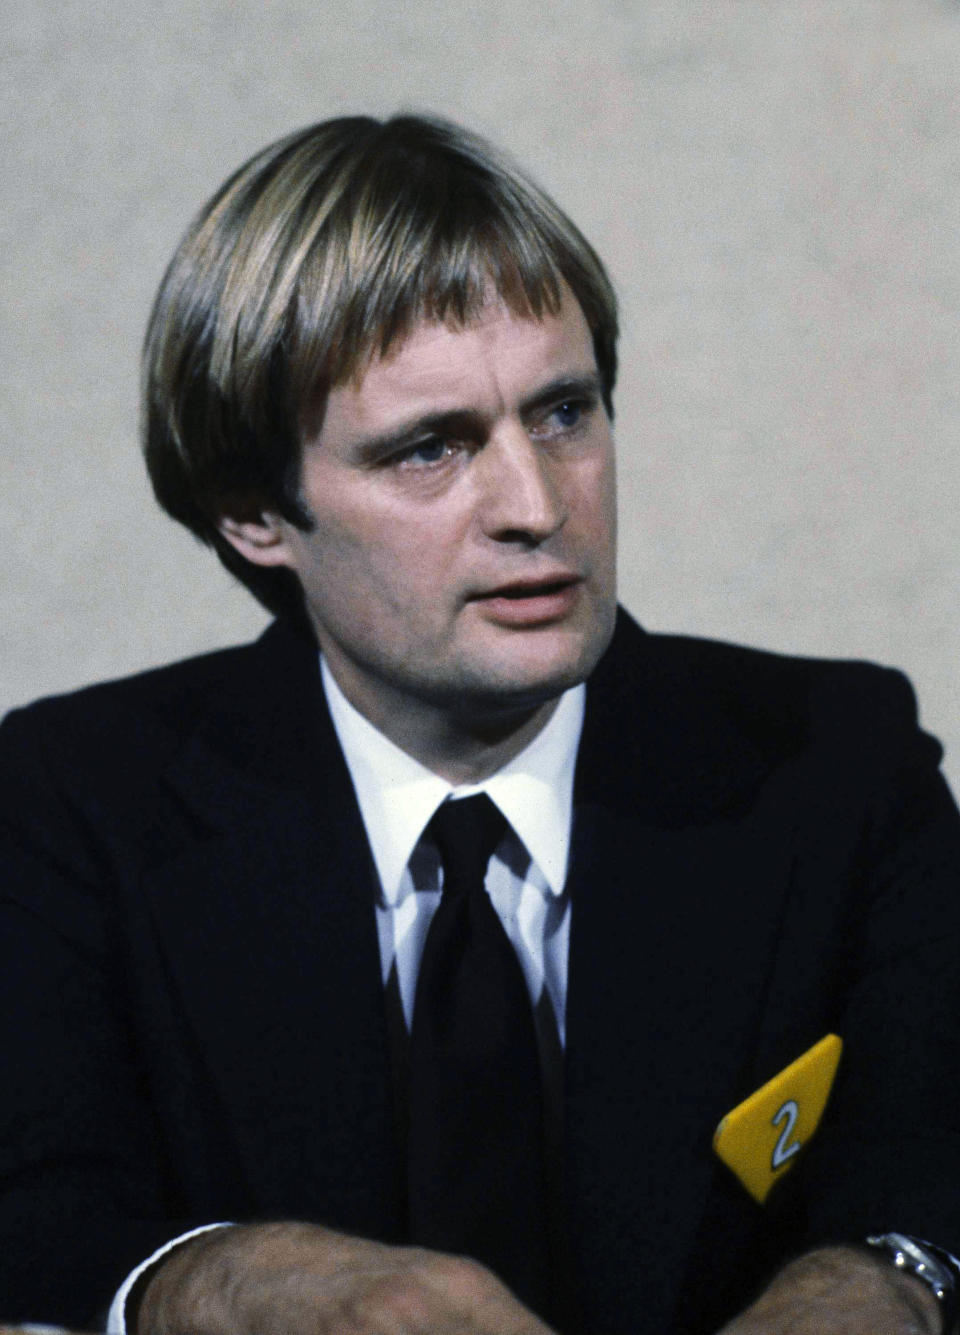 FILE - Actor David McCallum is shown on Nov. 23, 1982. McCallum, who became a teen heartthrob in the hit series "The Man From U.N.C.L.E." in the 1960s and was the eccentric medical examiner in the popular "NCIS" 40 years later, died on Monday, Sept. 25, 2023. He was 90. He died of natural causes surrounded by family at New York Presbyterian Hospital, CBS said in a statement. (AP Photo/Richard Drew, File)